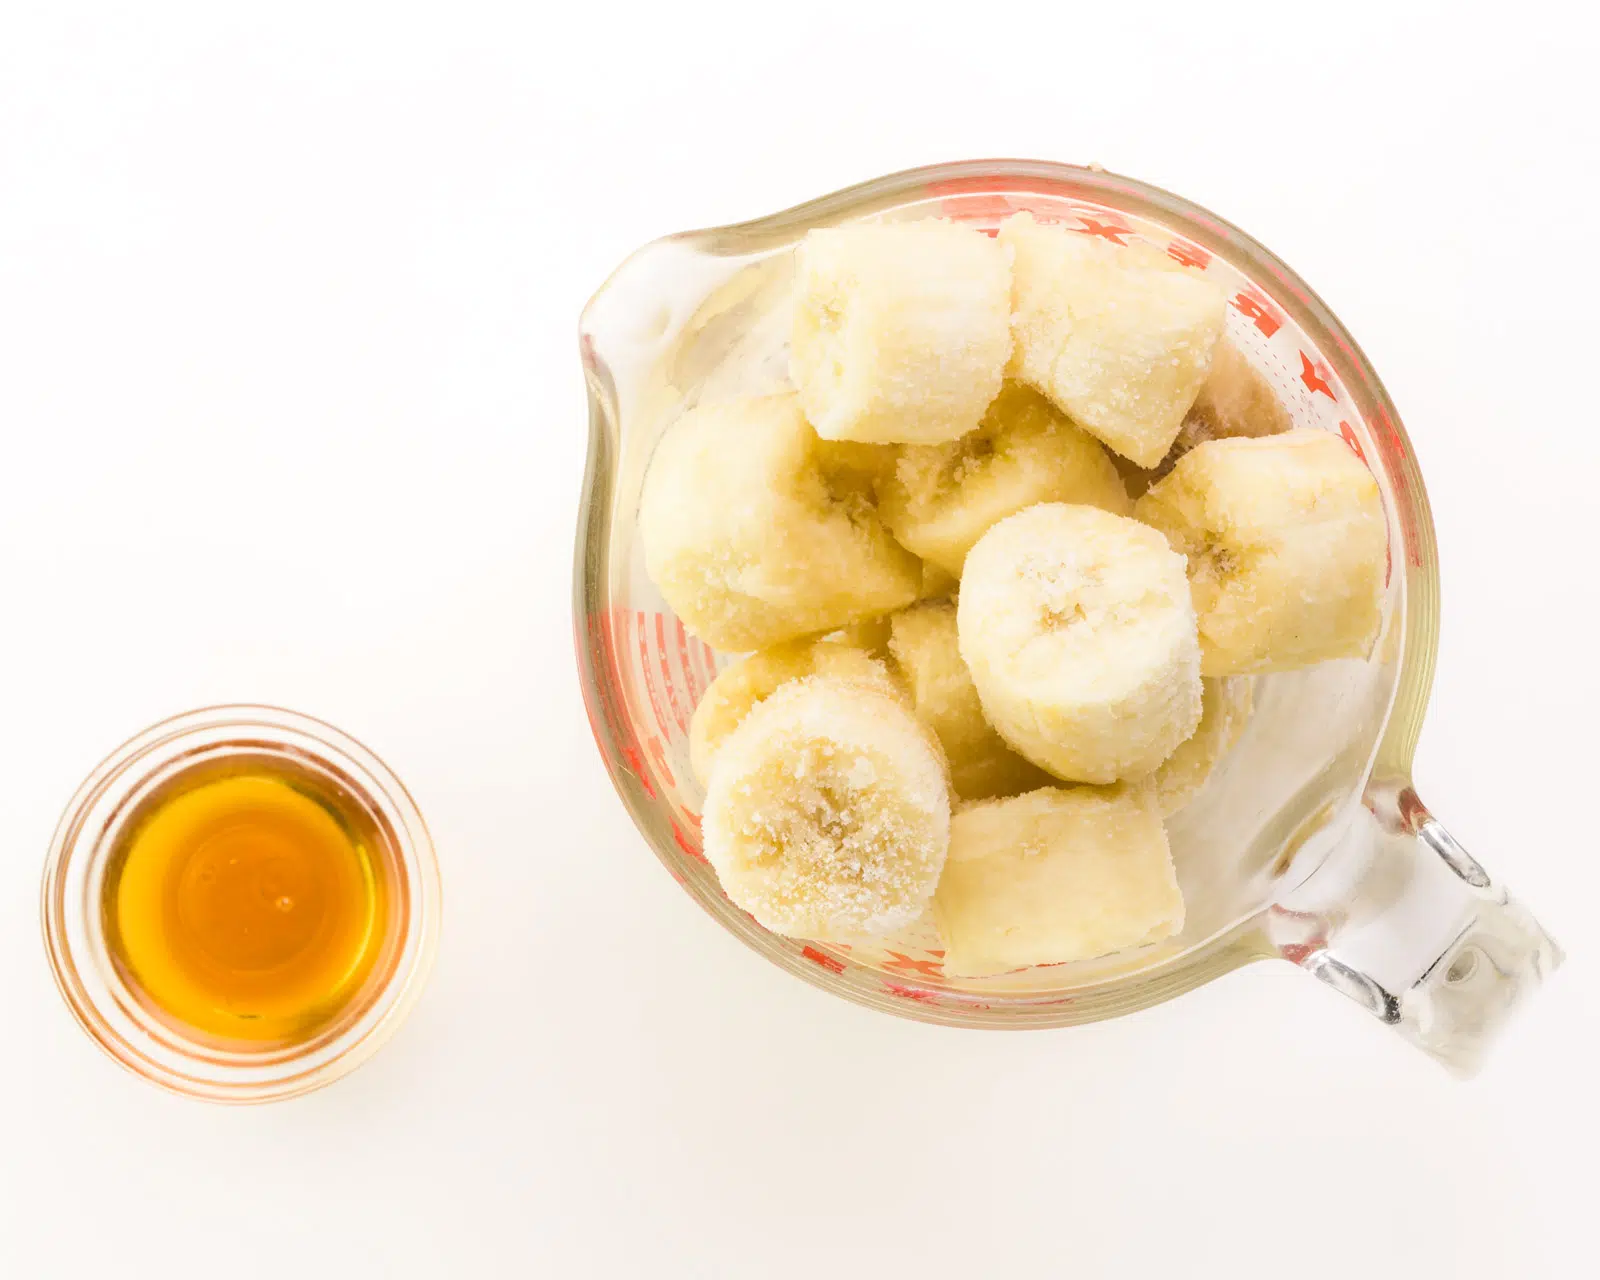 A pyrex measuring glass full of sliced bananas sits next to a small bowl of maple syrup.